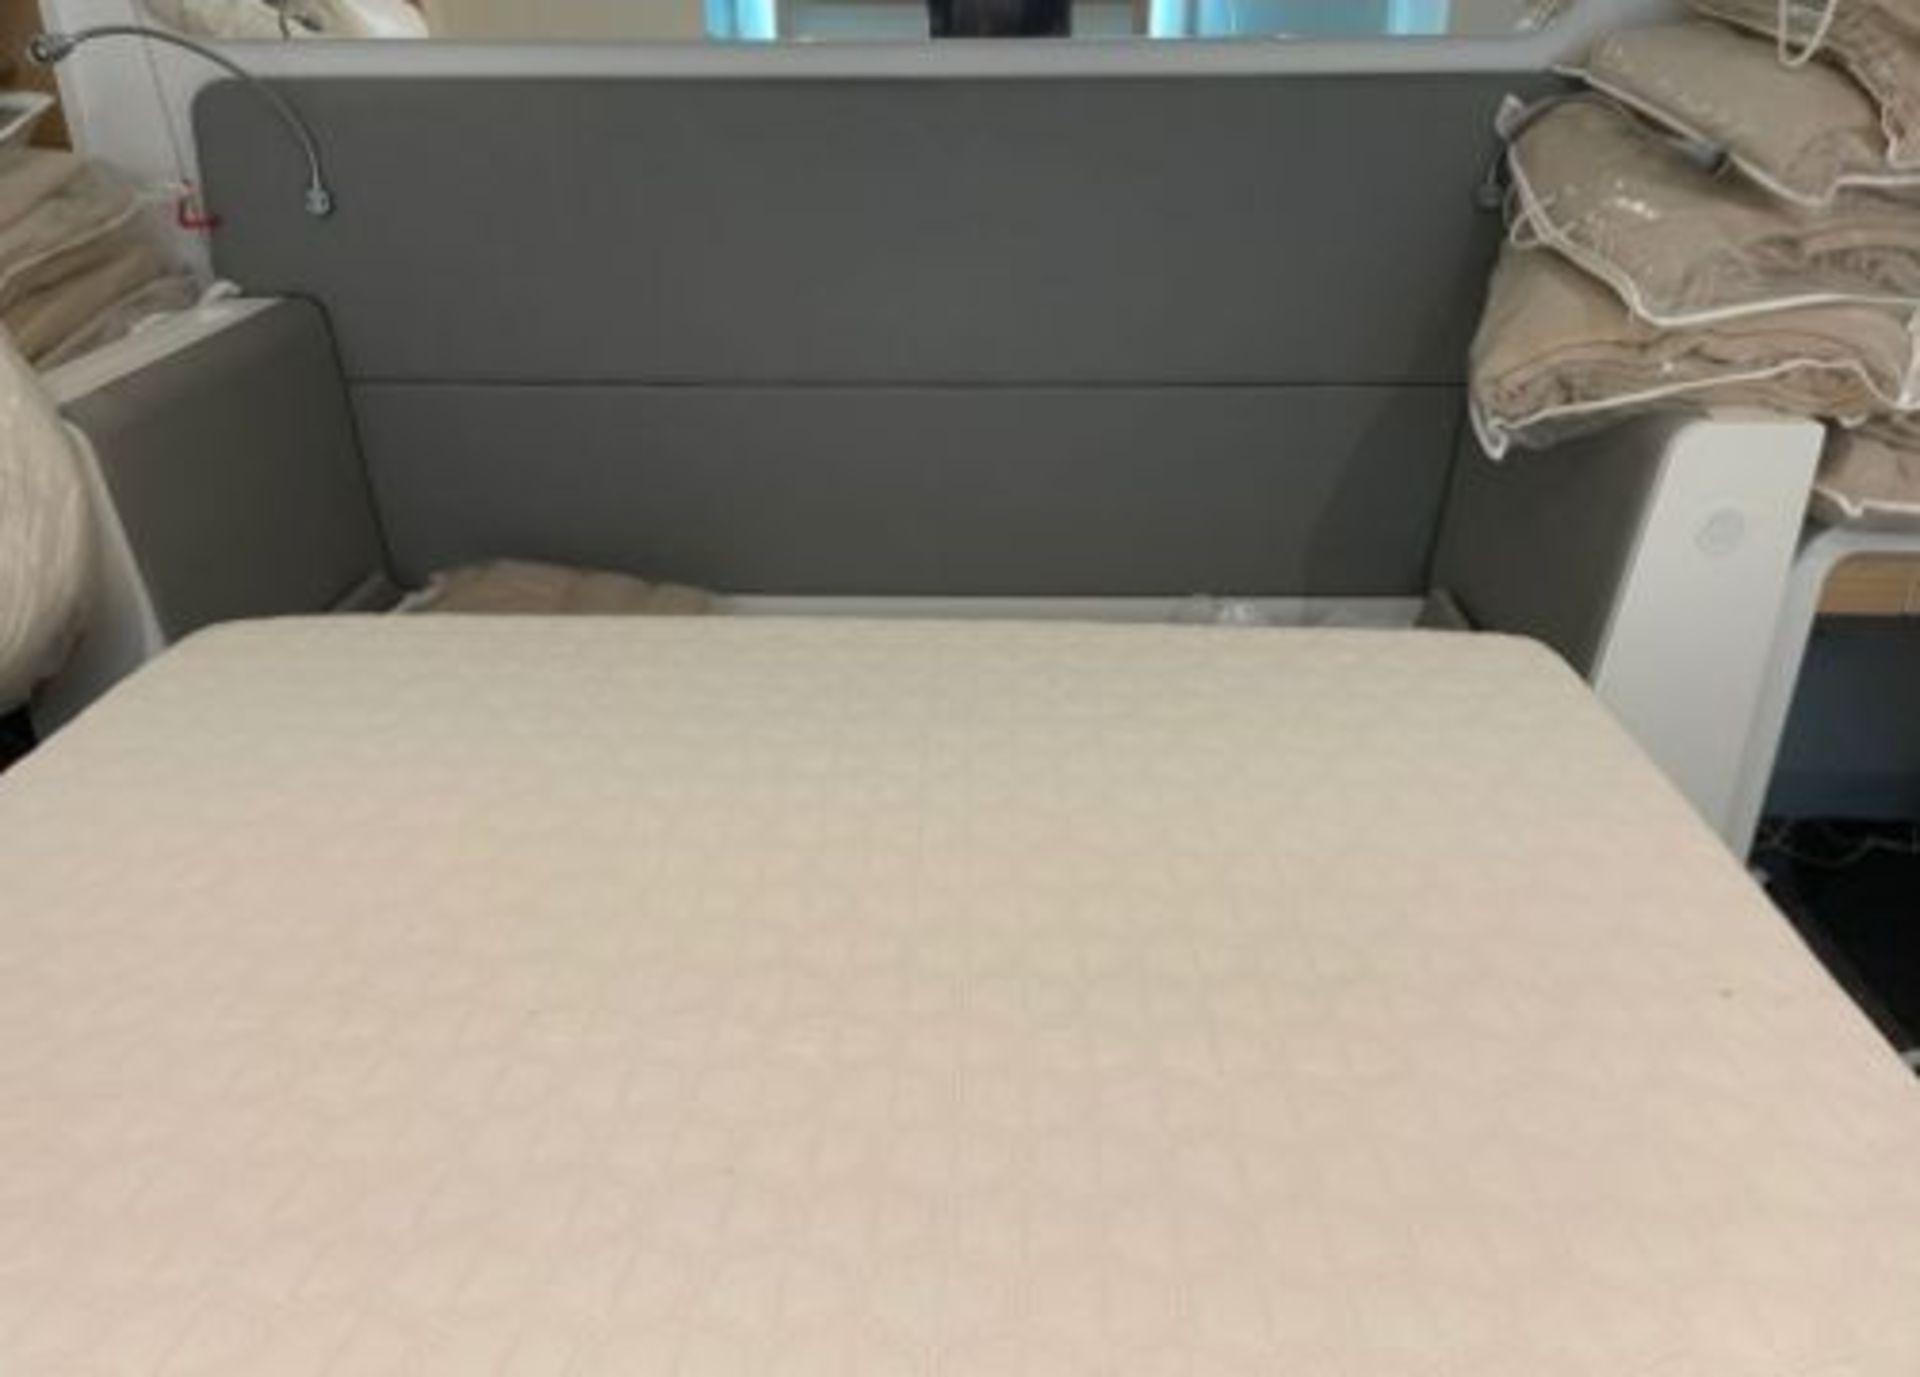 1 x Double Adjustable Space Saving Smart Bed With Serta Motion Memory Foam Mattress - Signature - Image 7 of 8